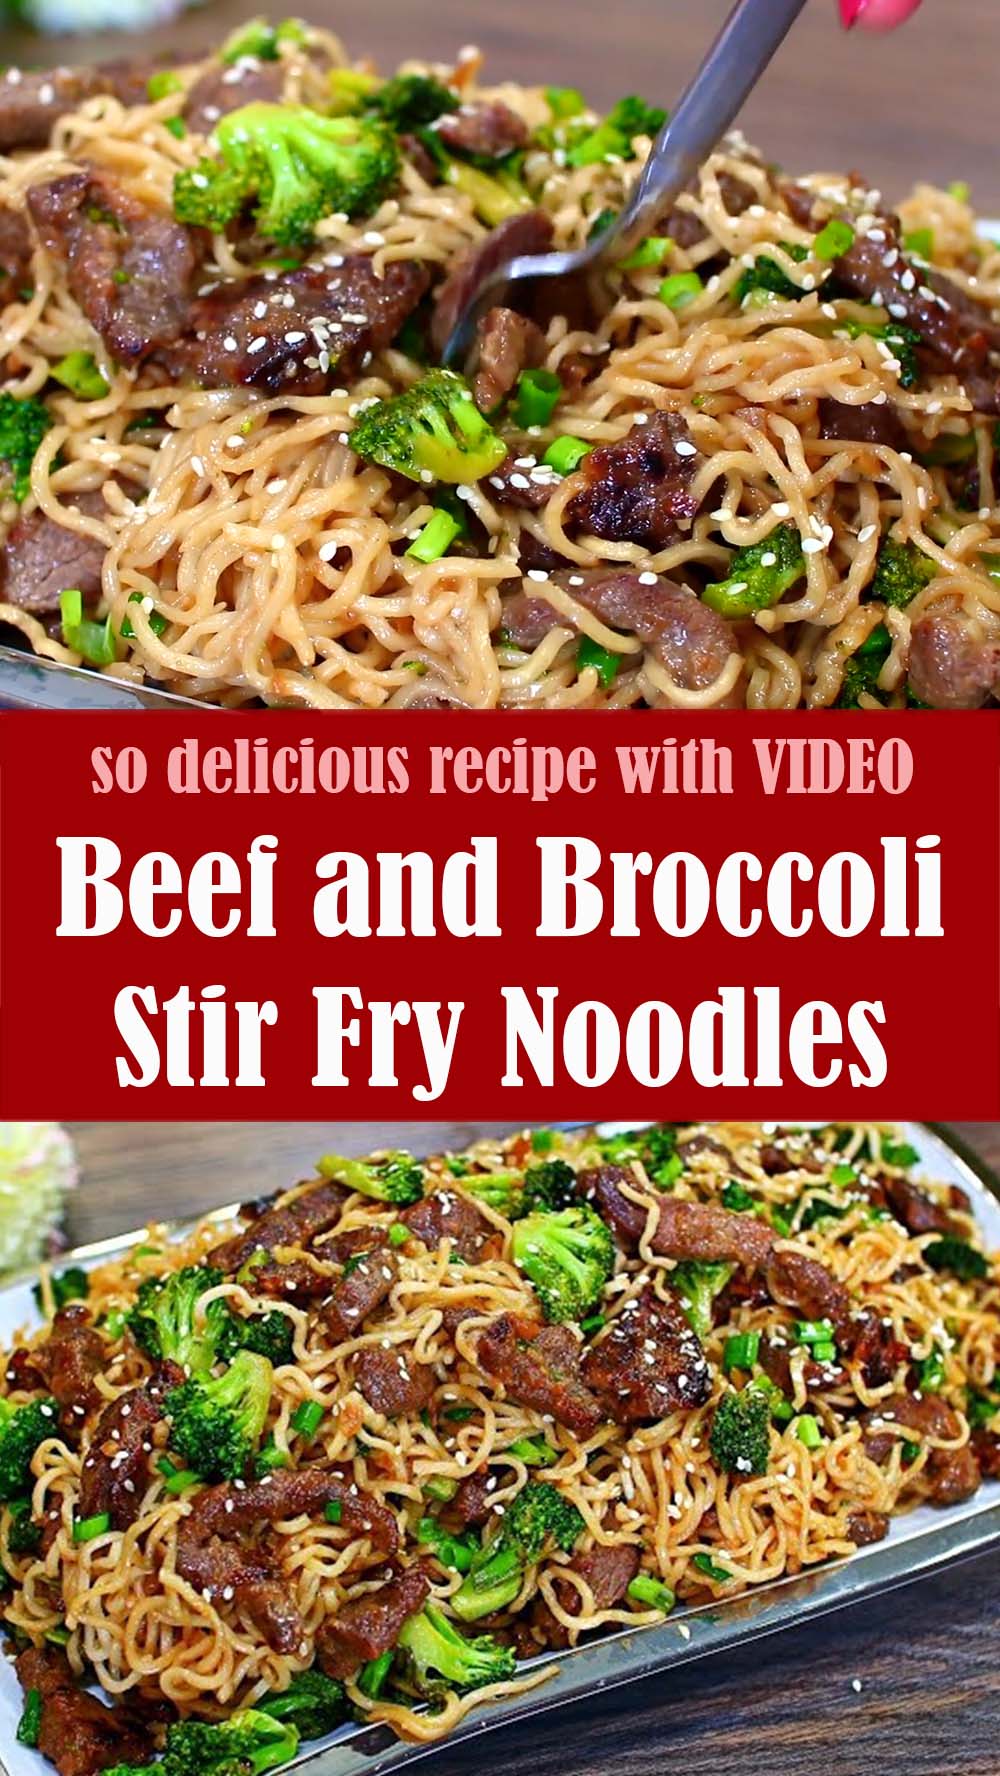 Beef and Broccoli Stir Fry Noodles Recipe